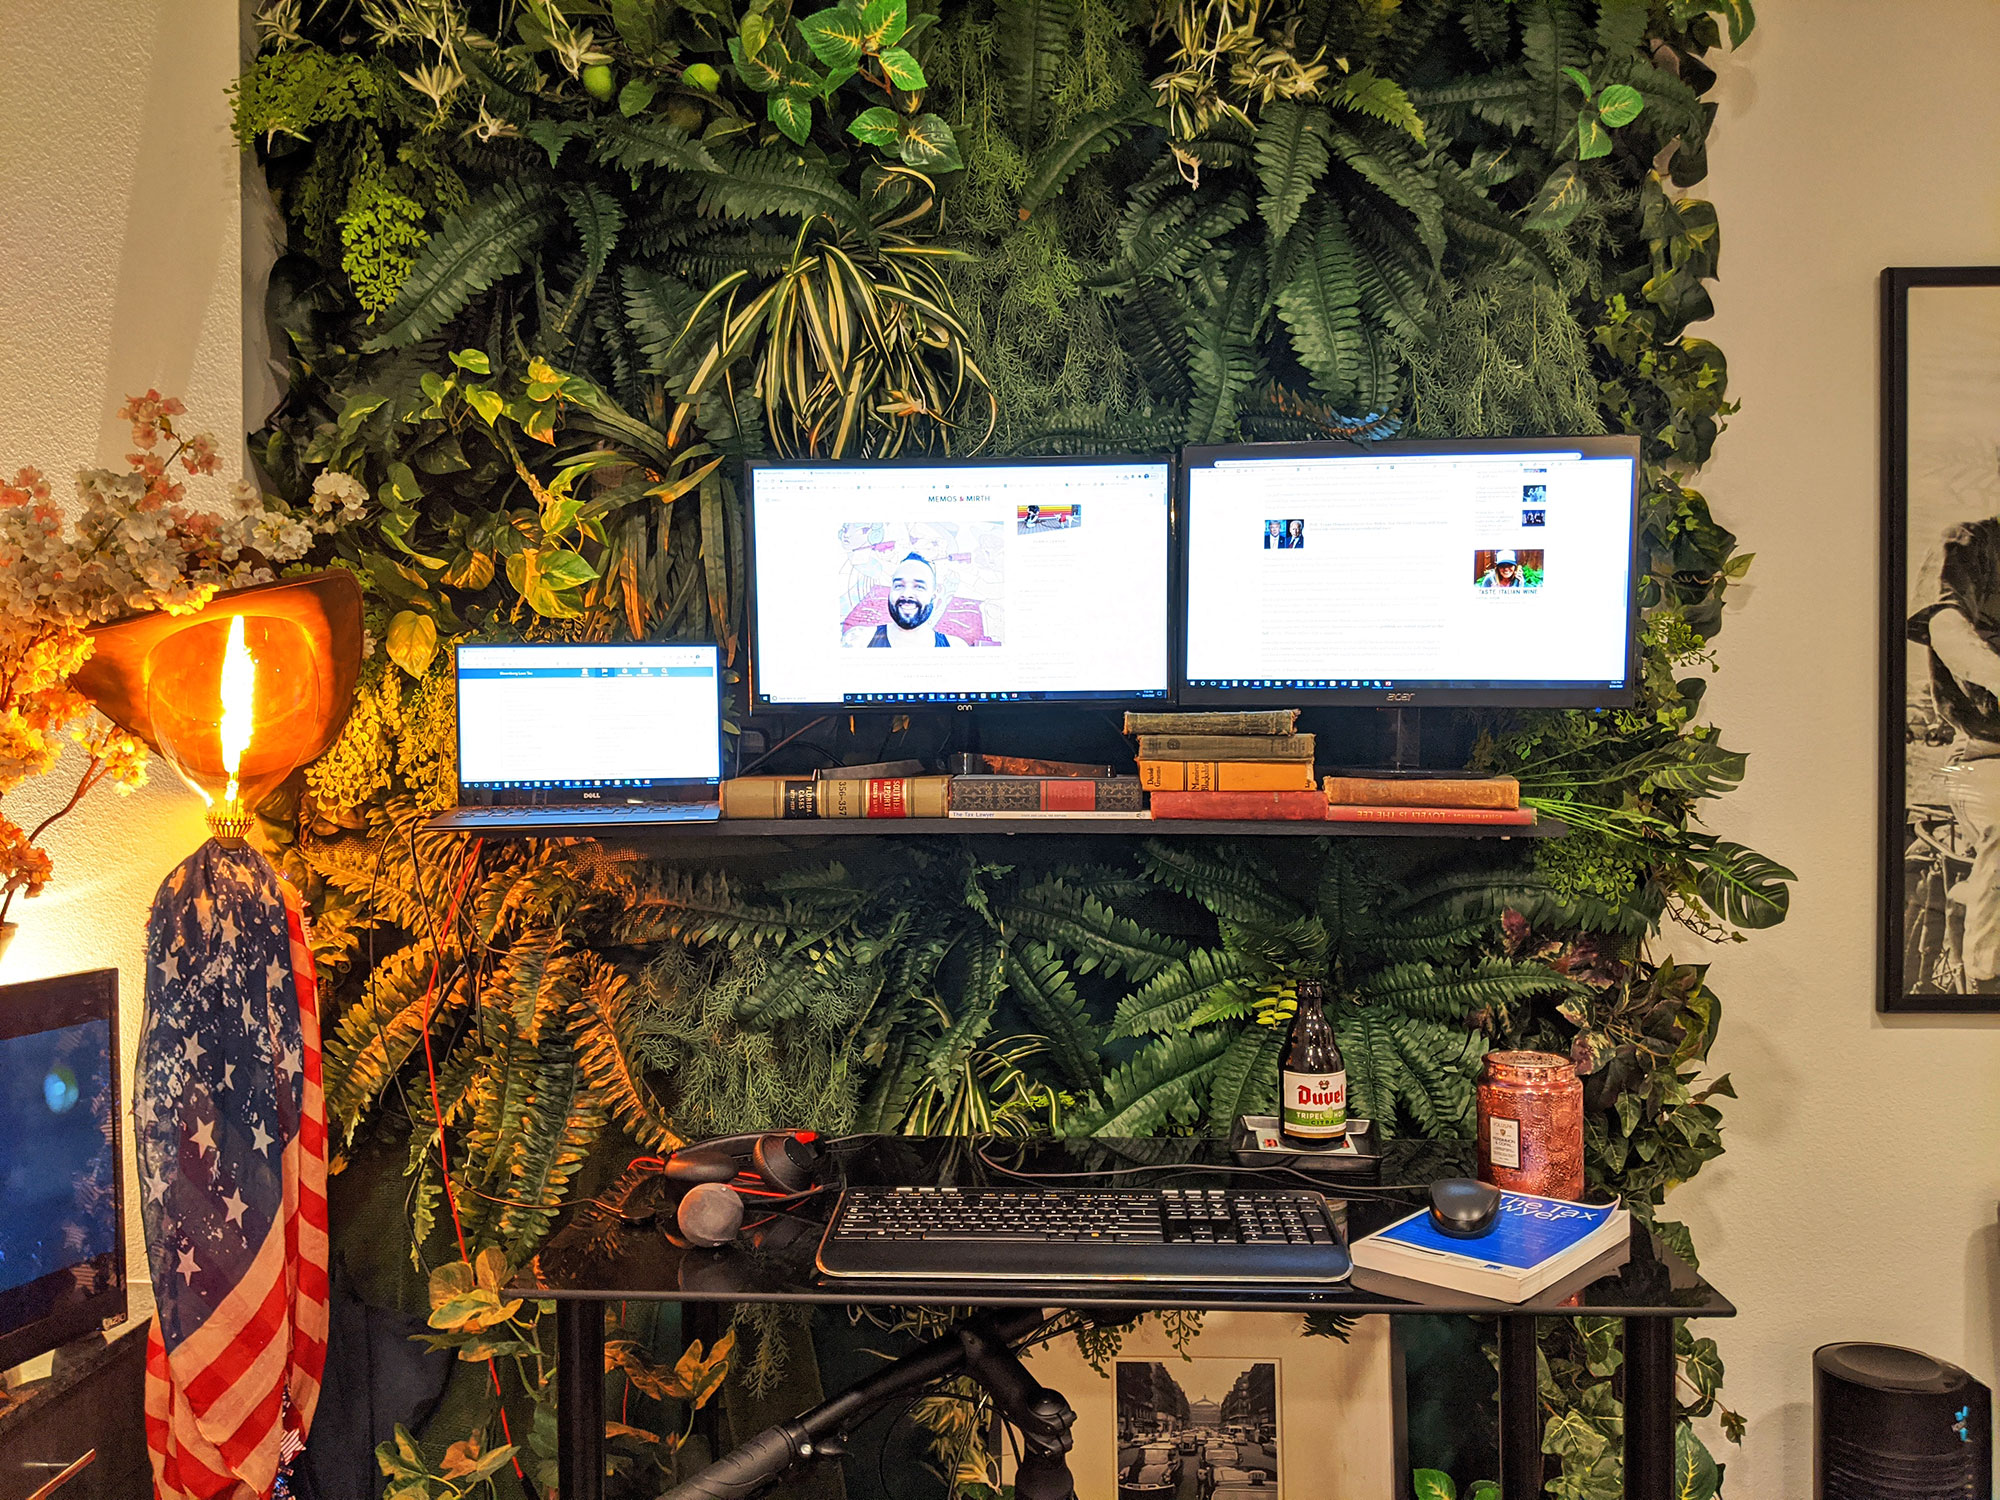 The finished green wall and biking desk.